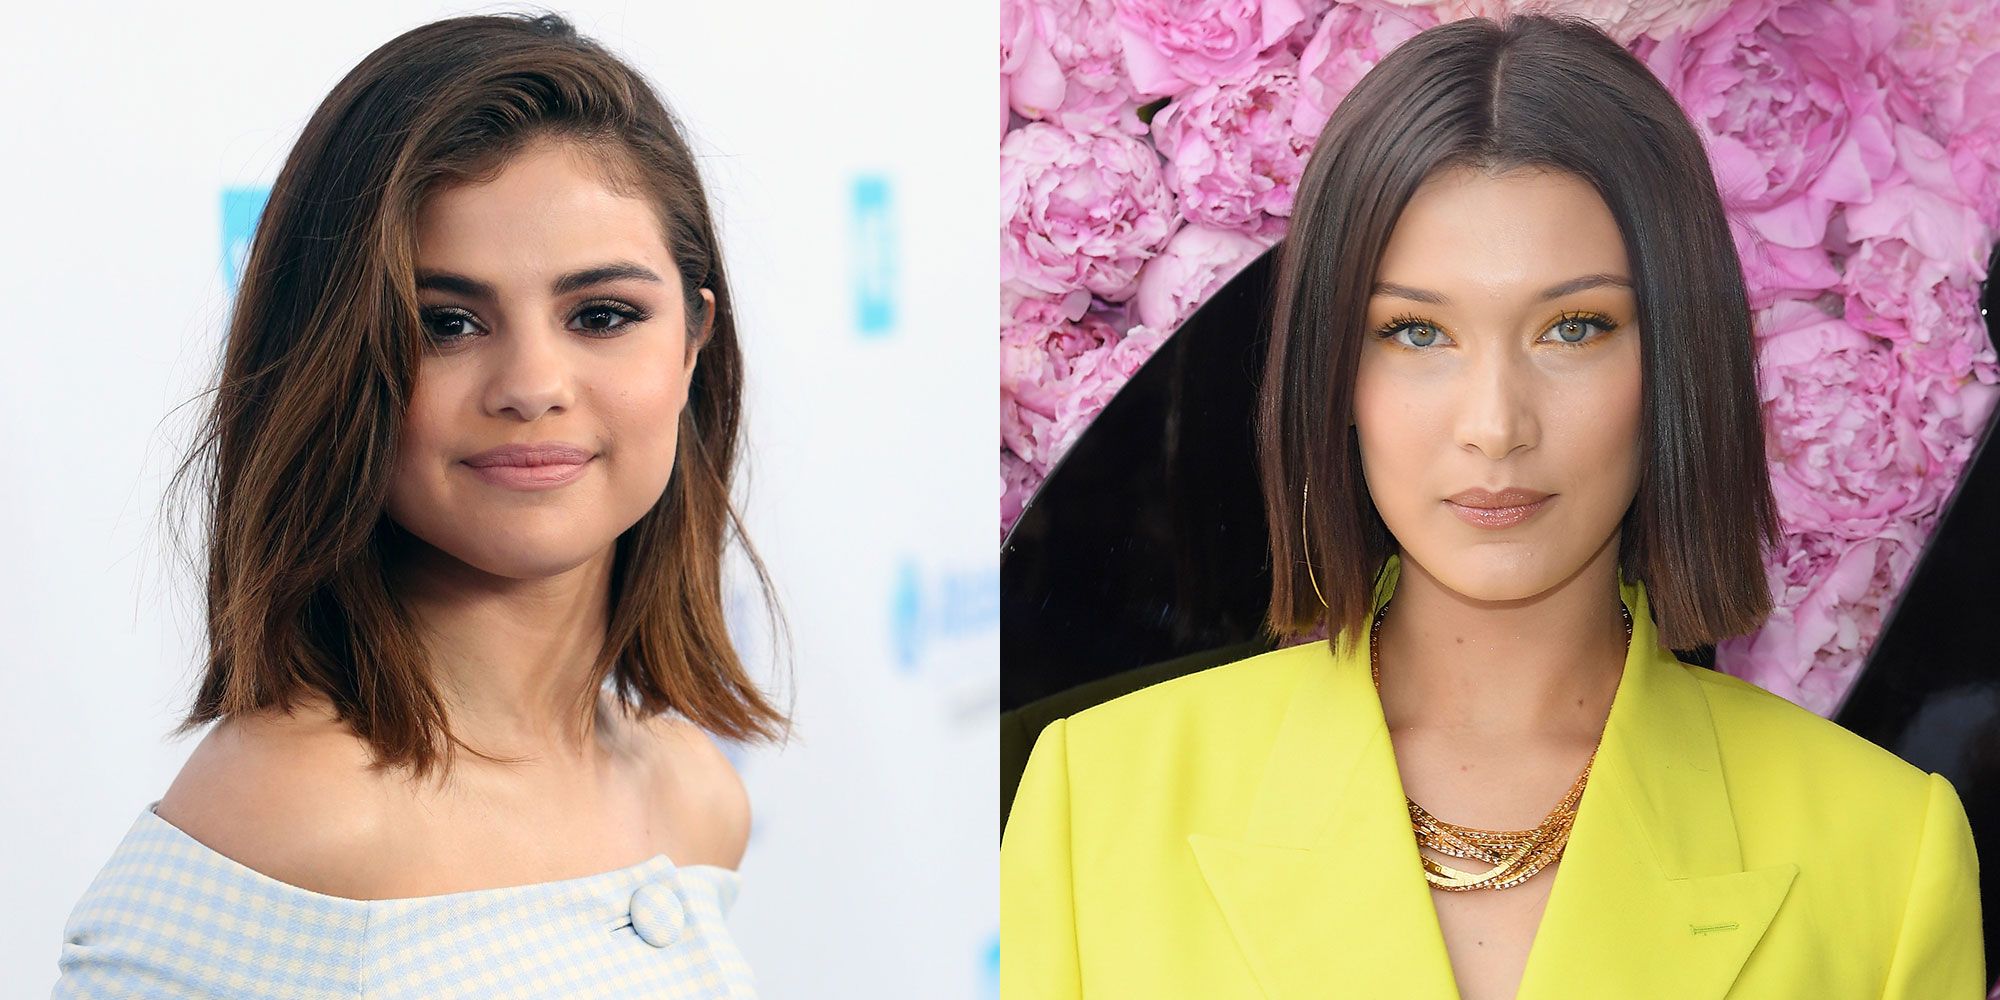 Selena Gomez, Bella Hadid, and Kendall Jenner All Wore the Same